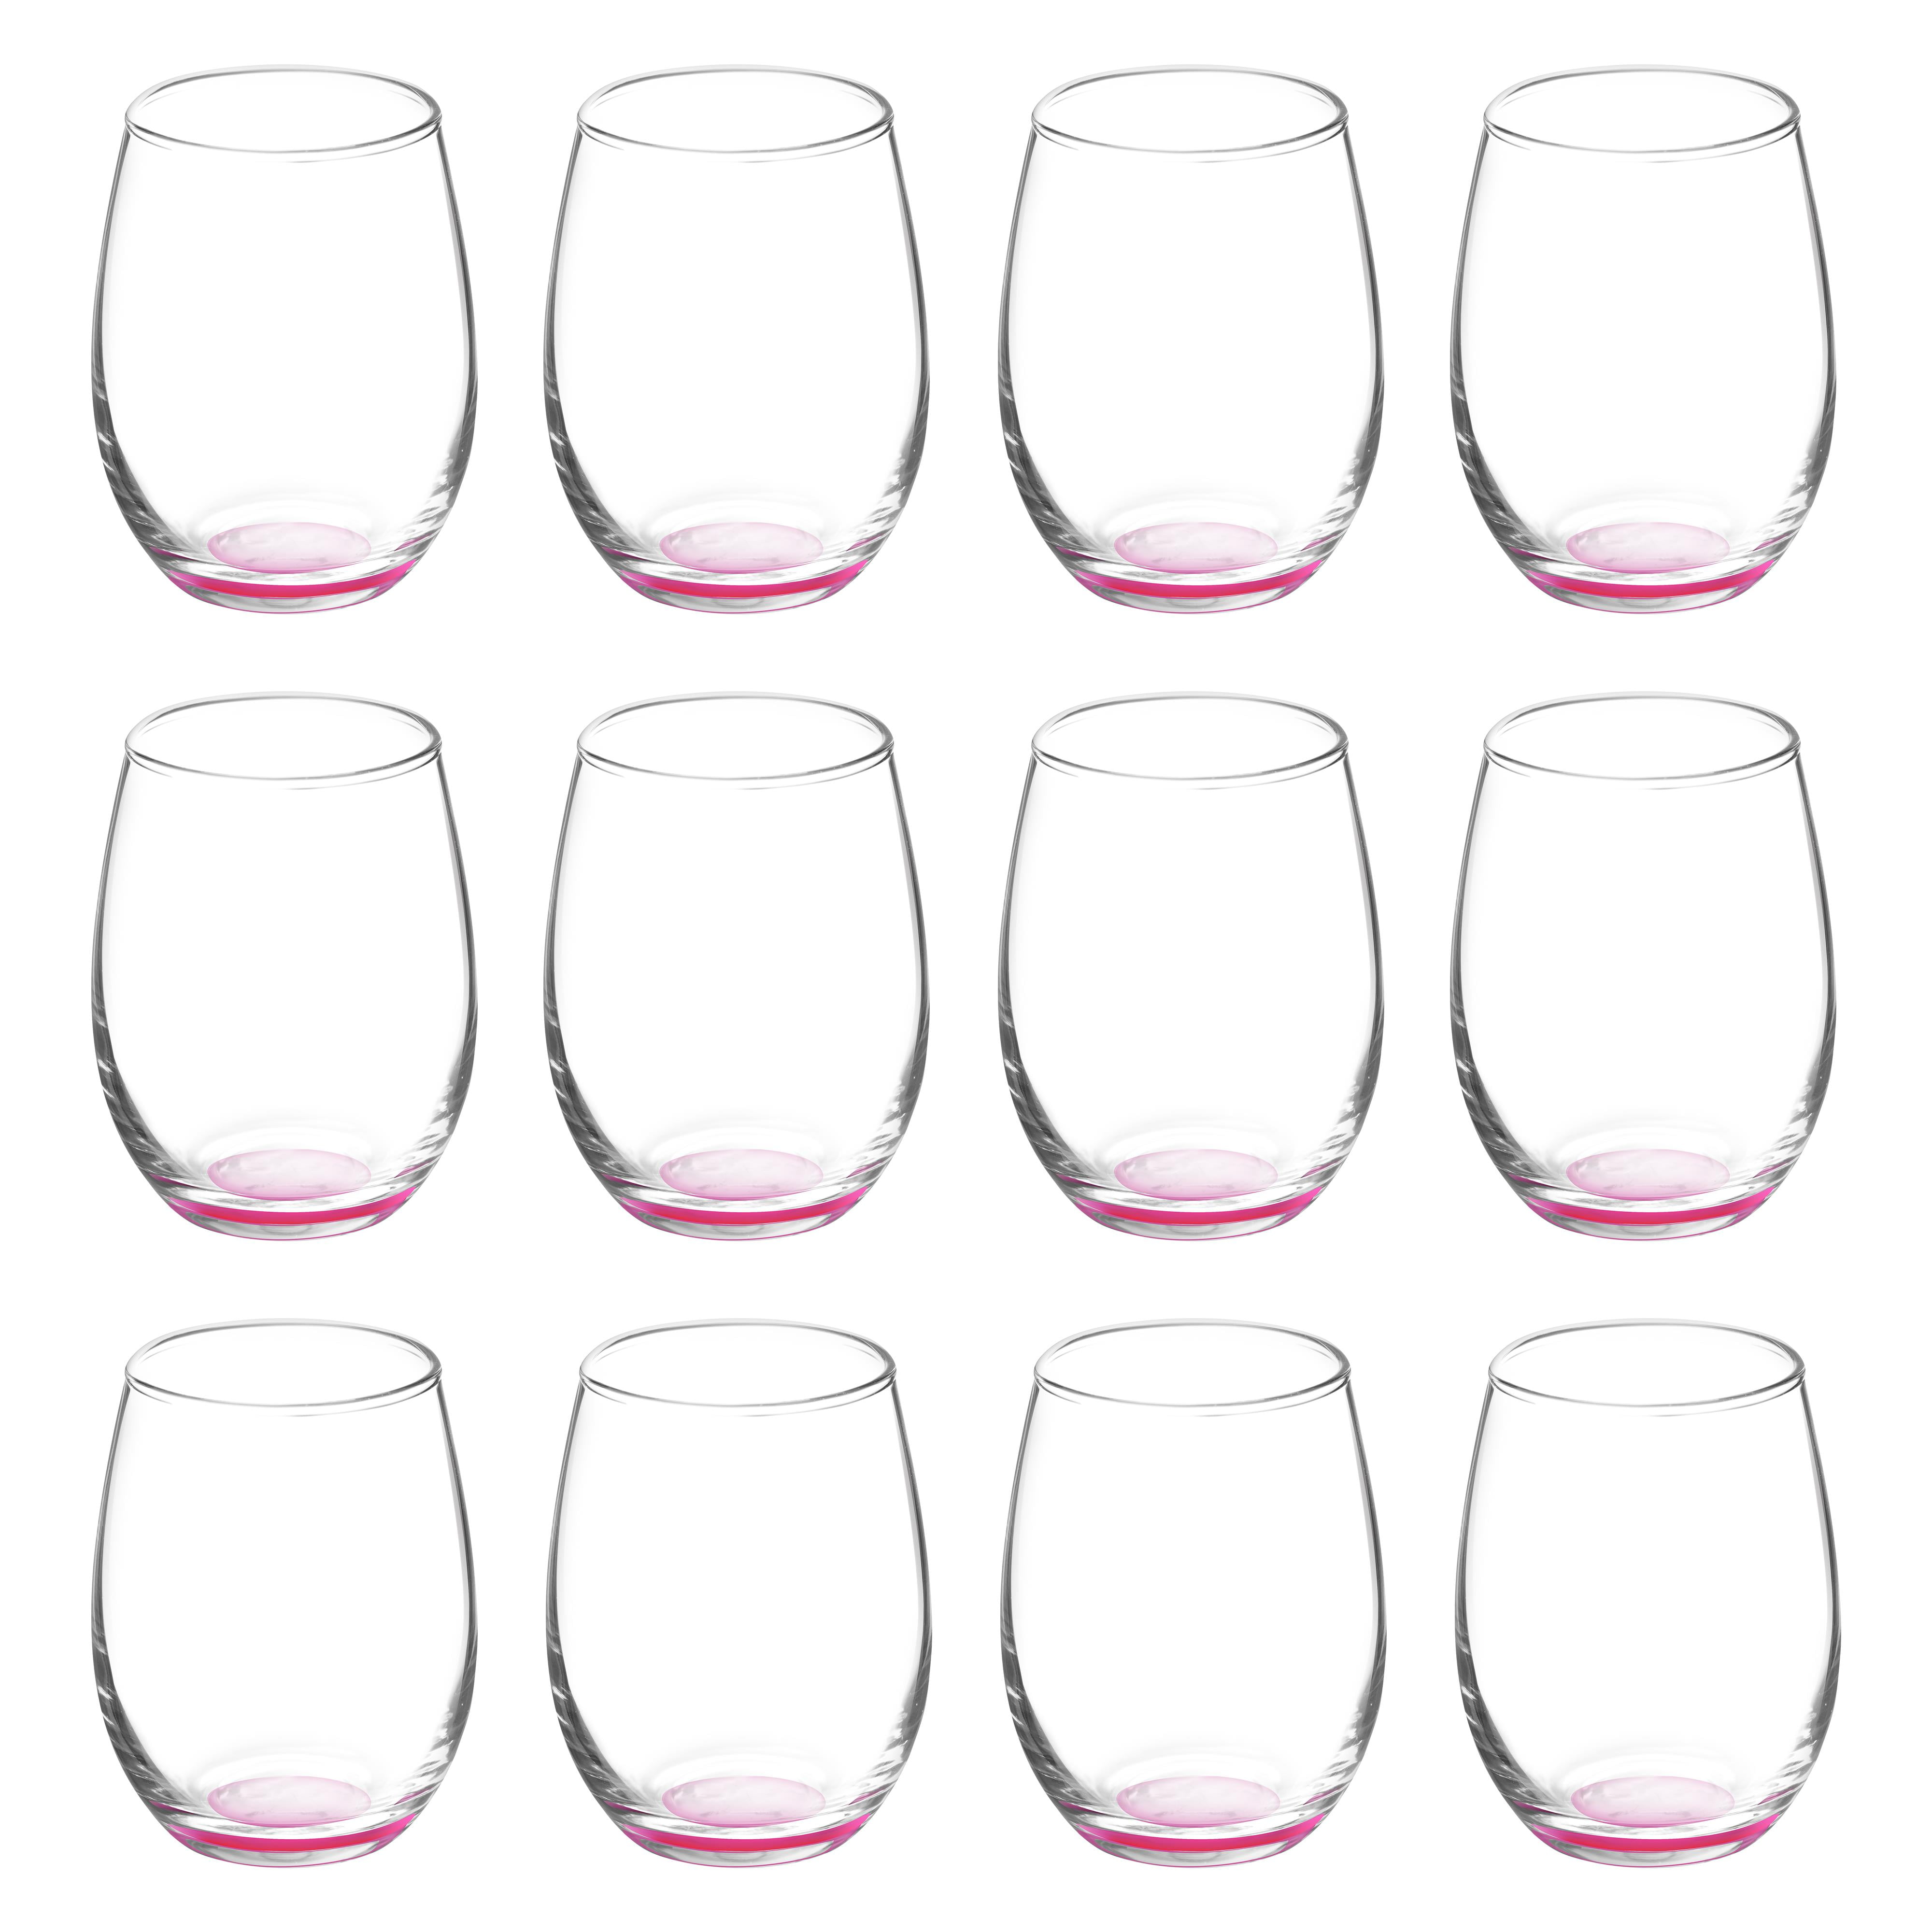 Stemless Wine Glasses in Bulk by ARC Perfection, 15 oz -10 pack, Red or  White Wine Glass Drinking Set, Blue 